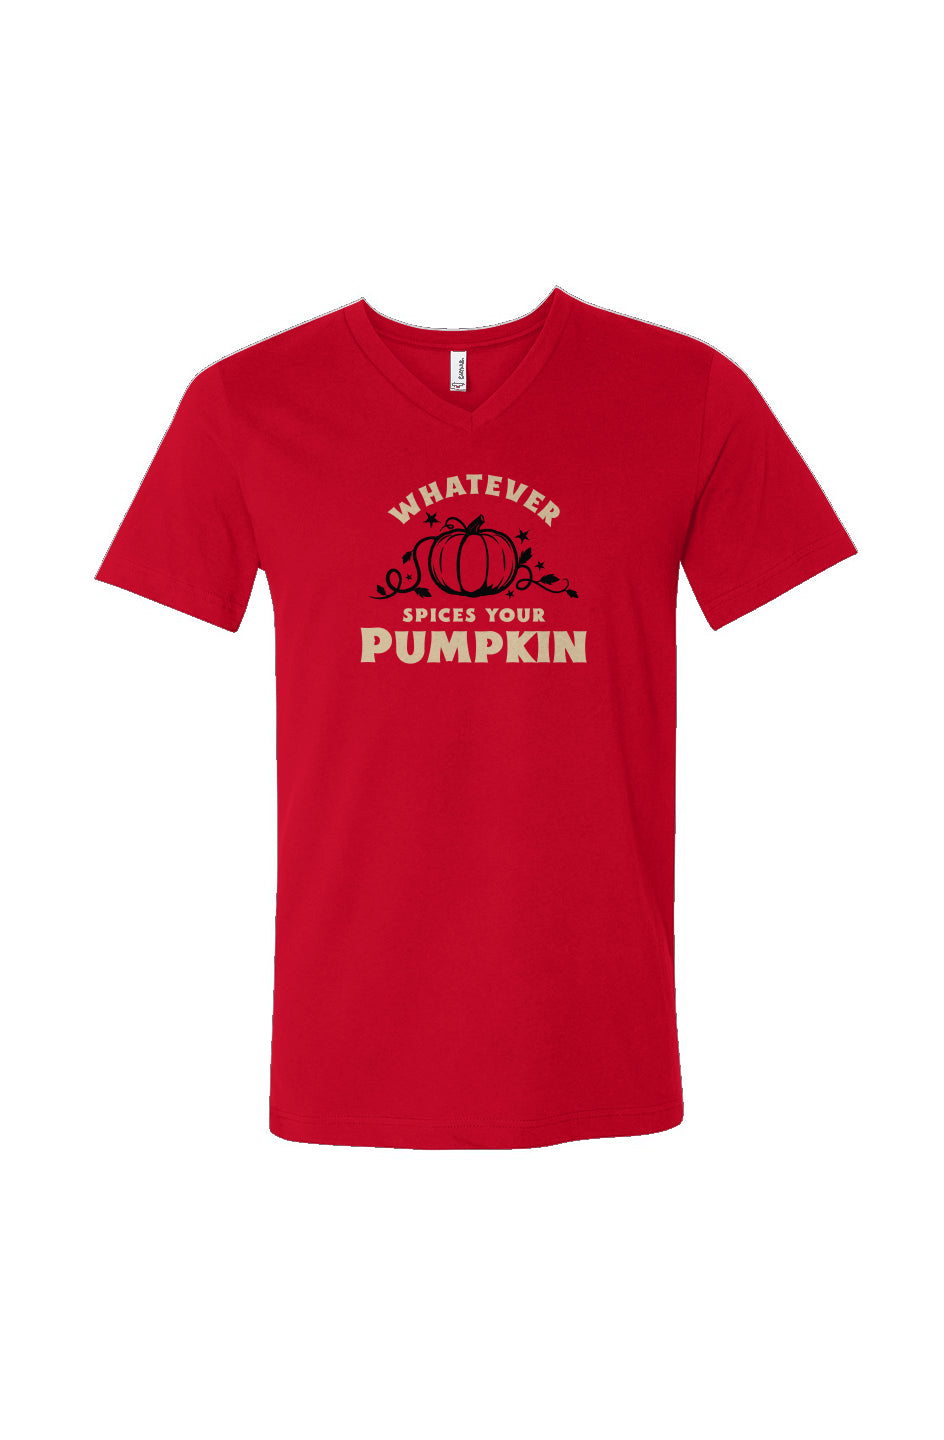 "Whatever Spices Your Pumpkin" Unisex Fit